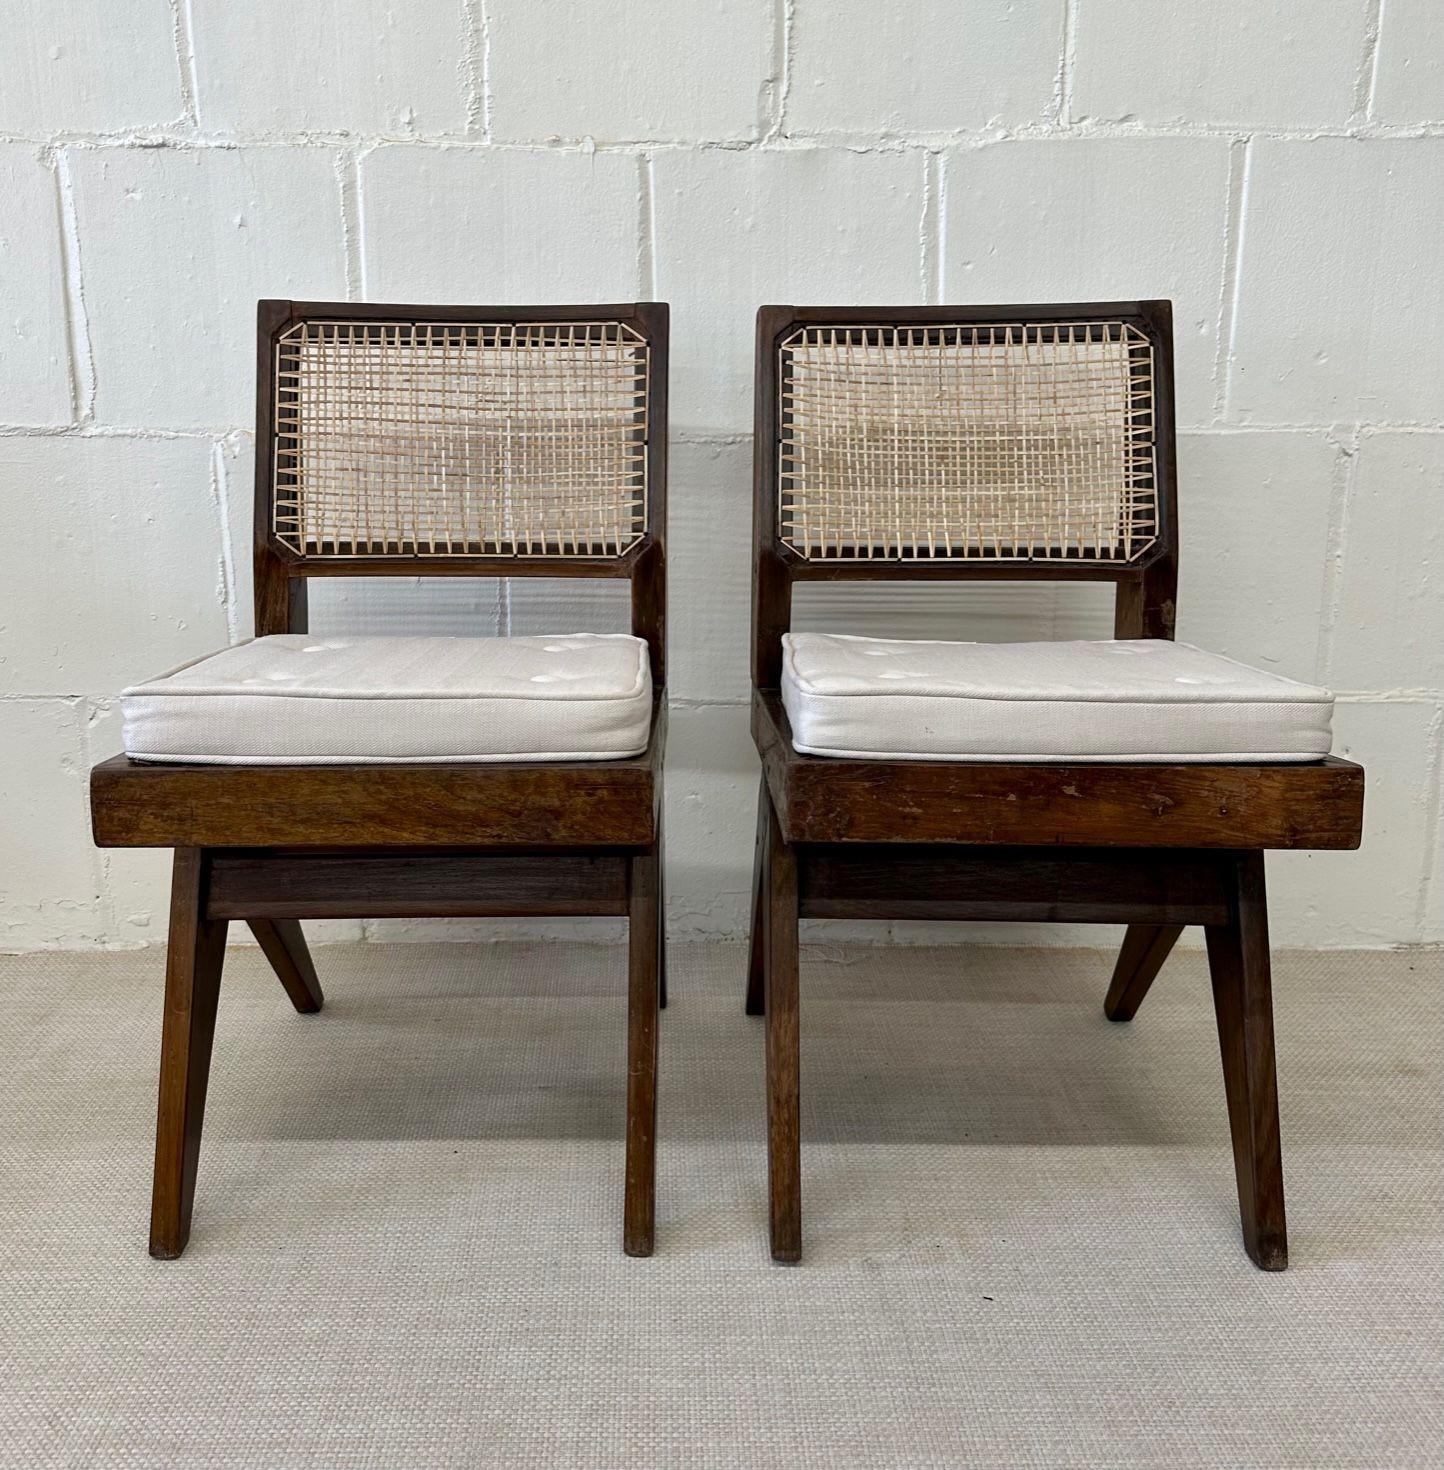 Cane Pierre Jeanneret, French Mid-Century Modern, Dining, Side Chairs, India, 1960s